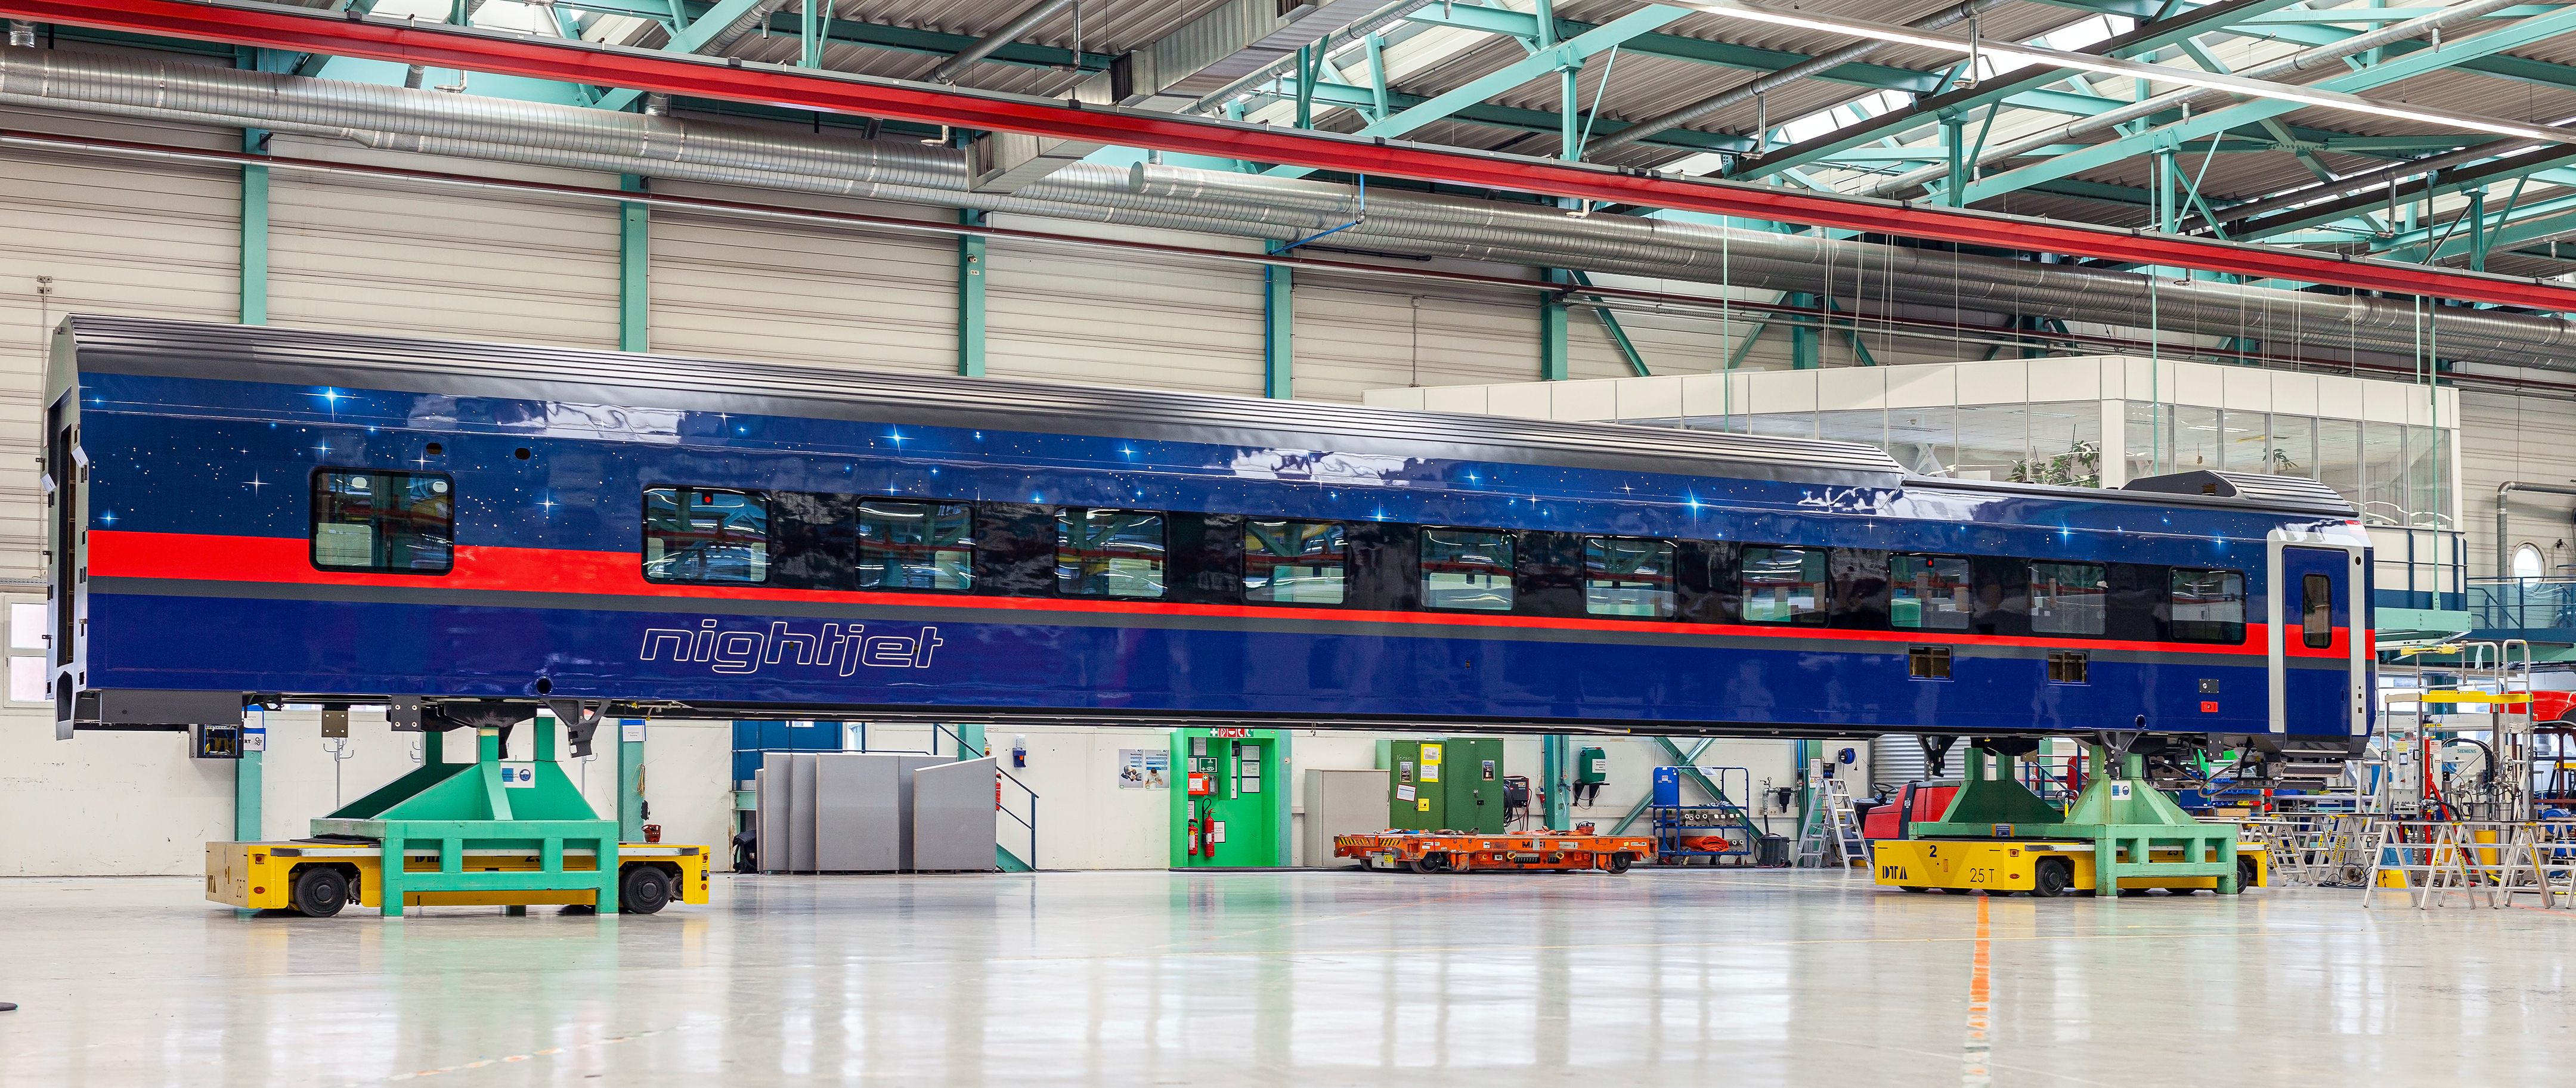 The Viaggio locomotive-hauled coach by Siemens Mobility at its production site in Vienna